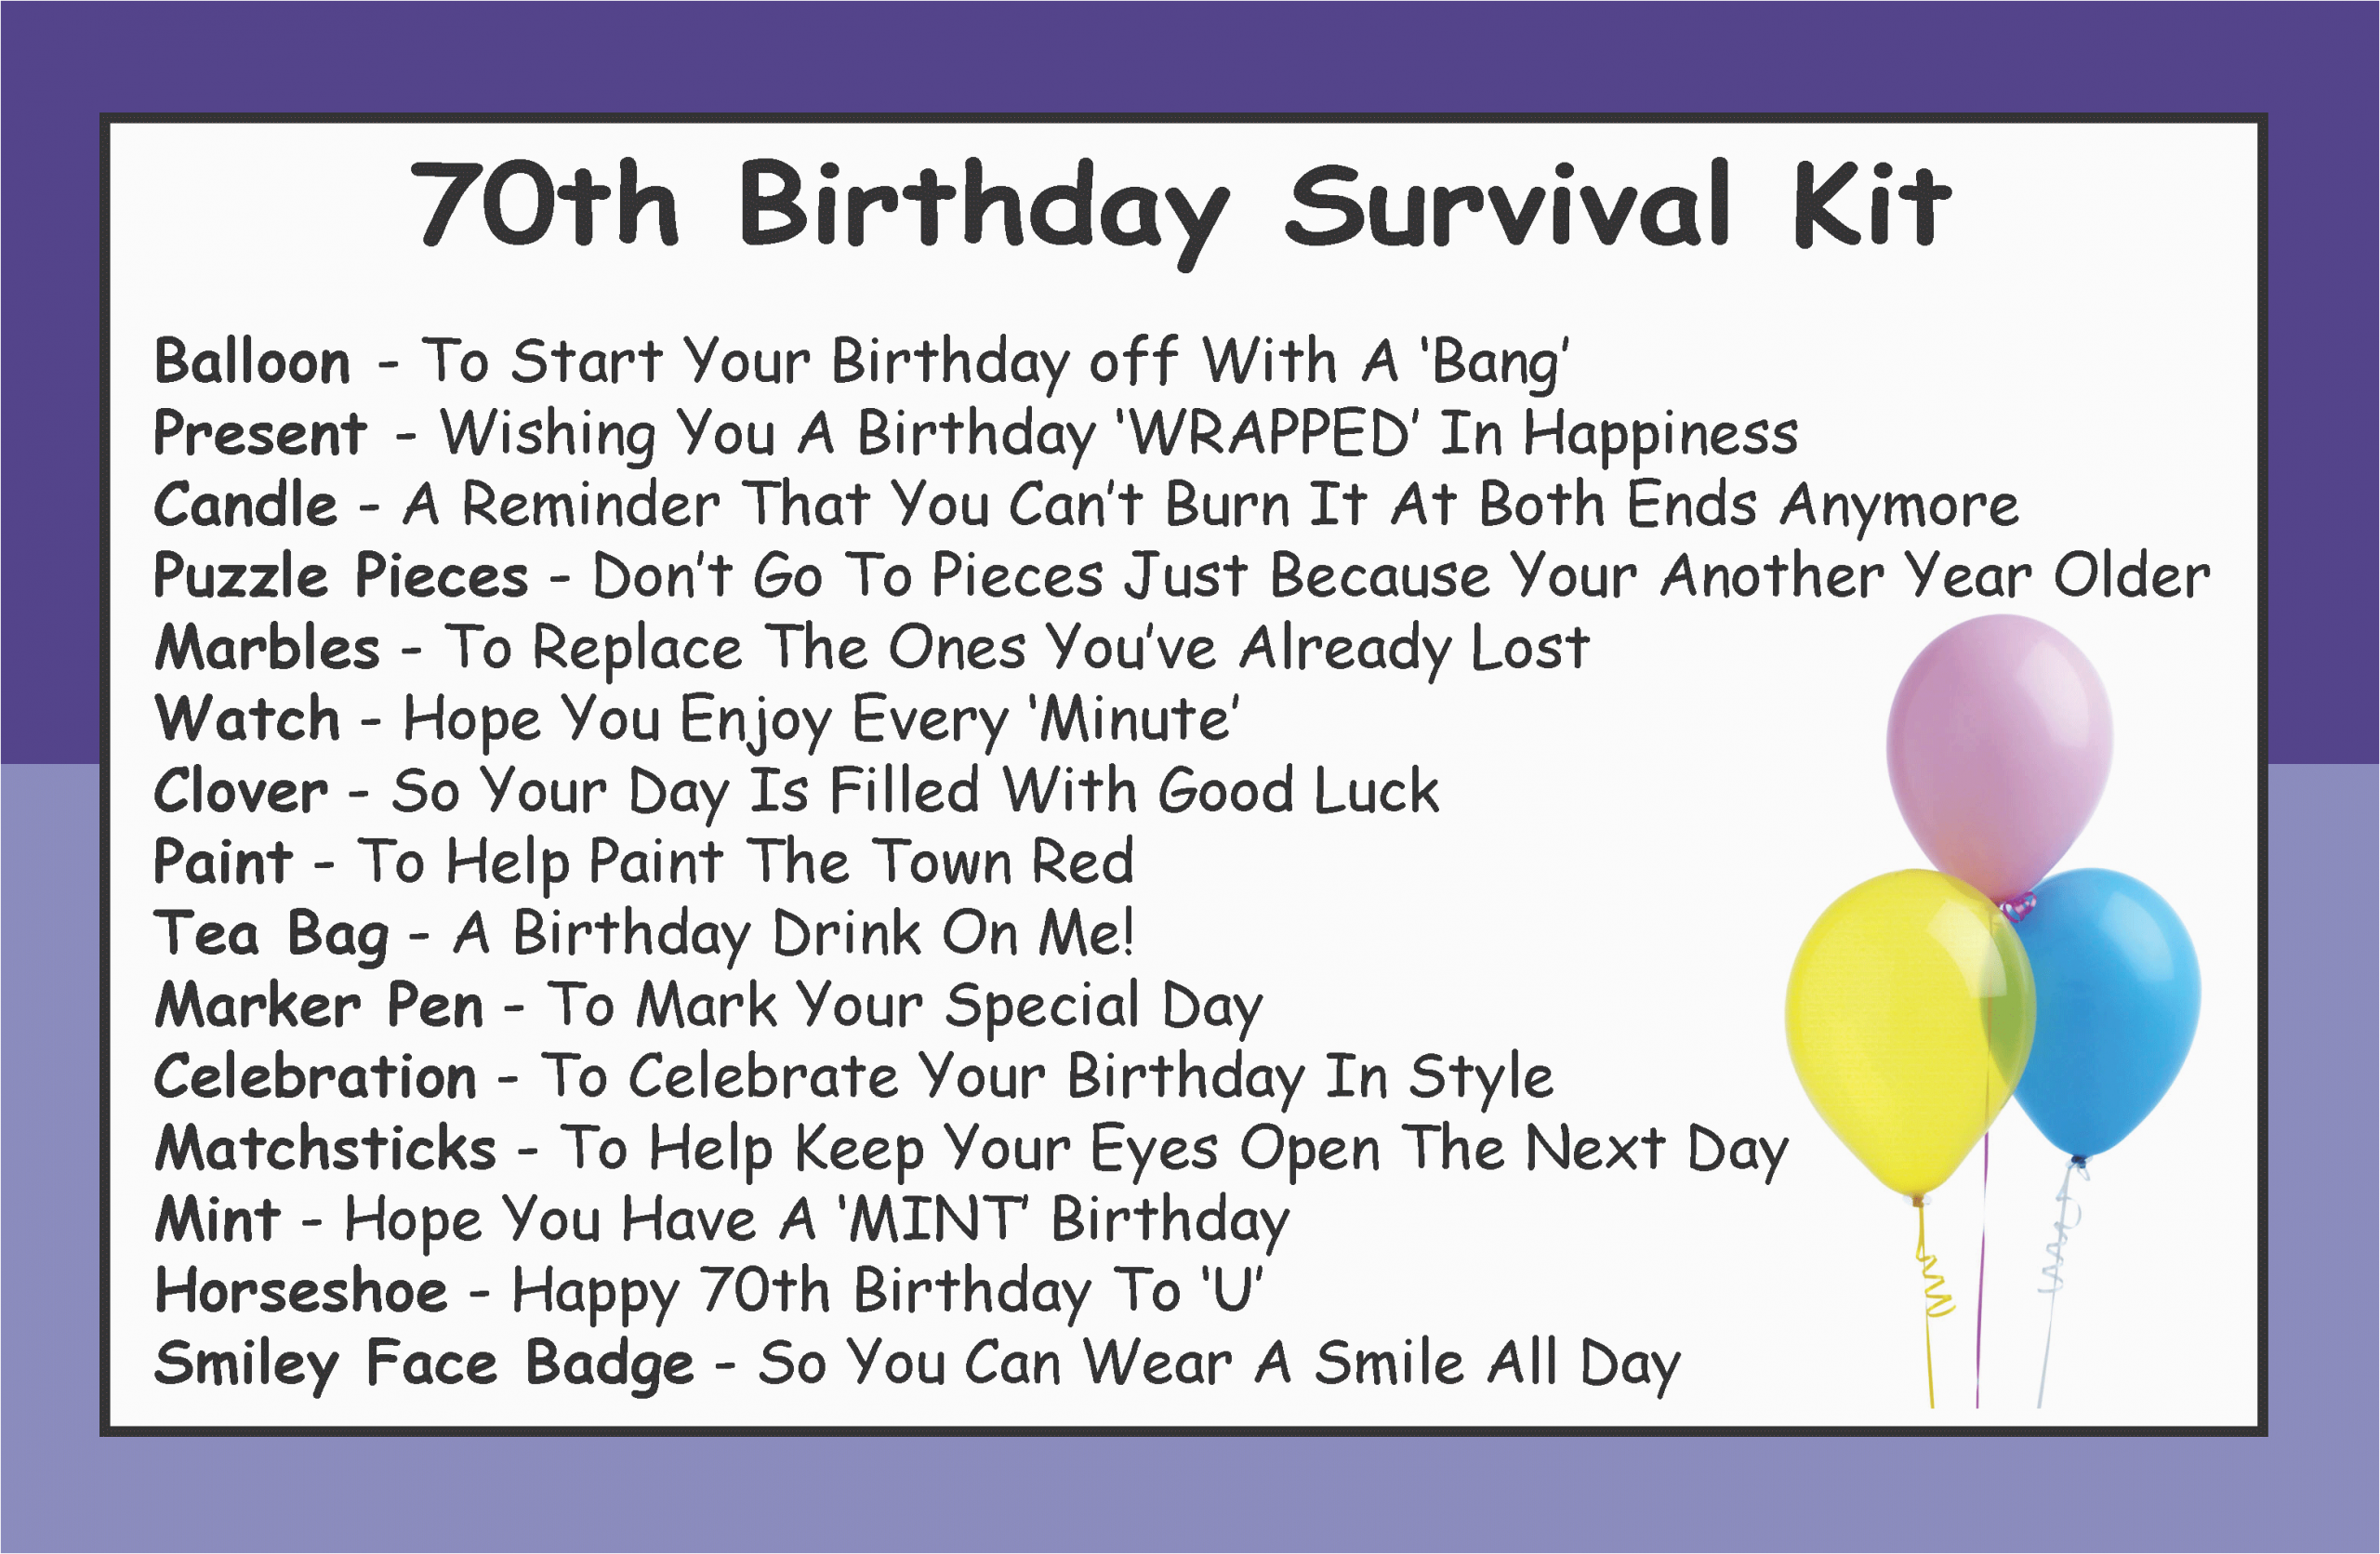 70th birthday survival kit in a can 8133 p